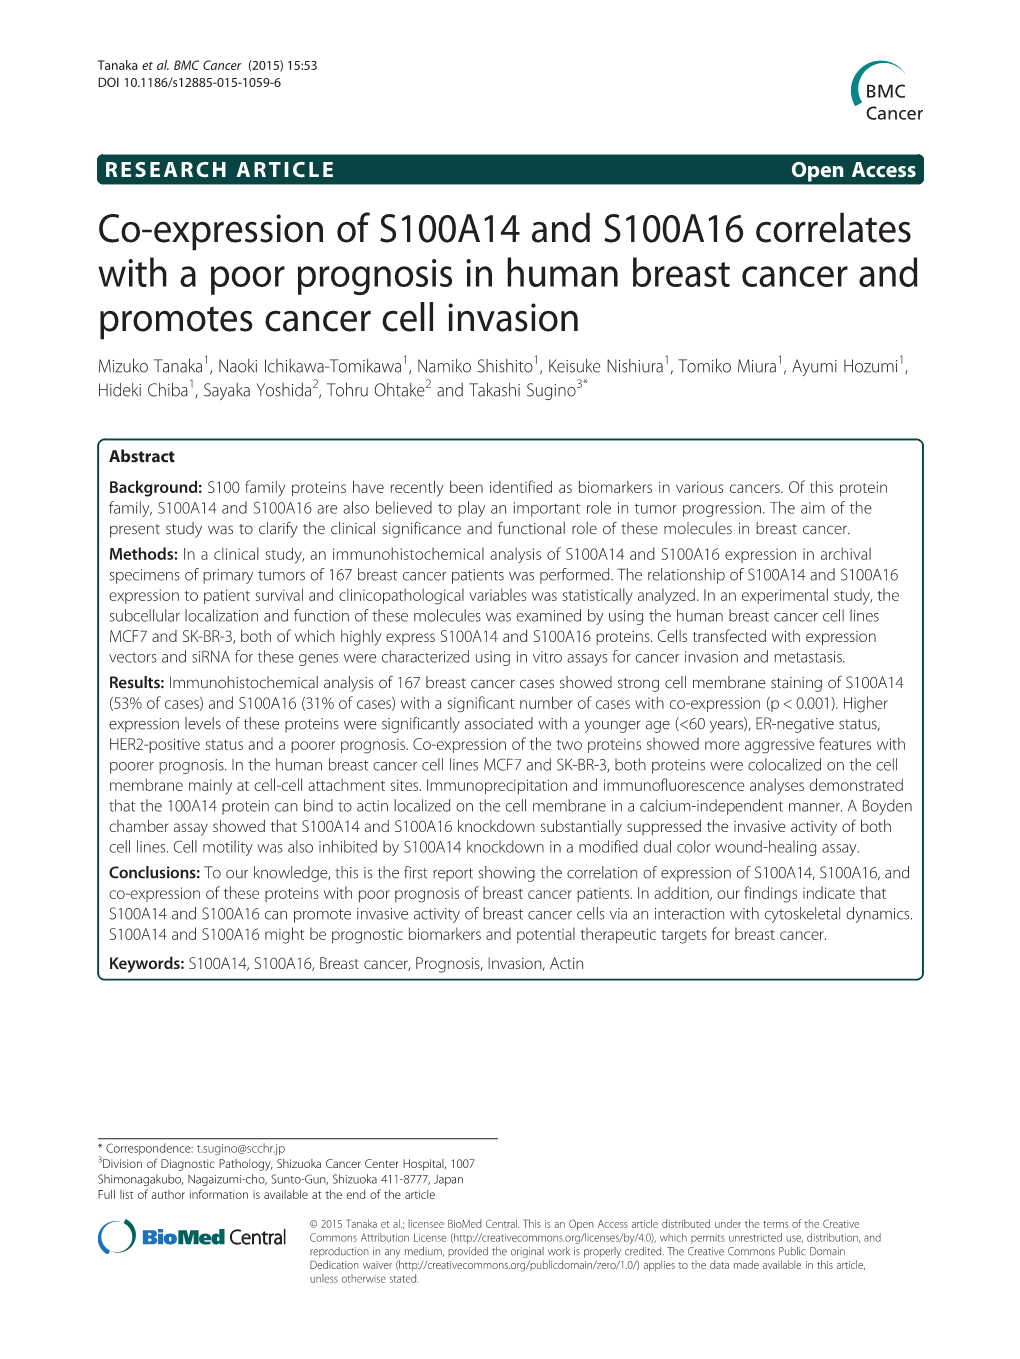 Co-Expression of S100A14 and S100A16 Correlates with a Poor